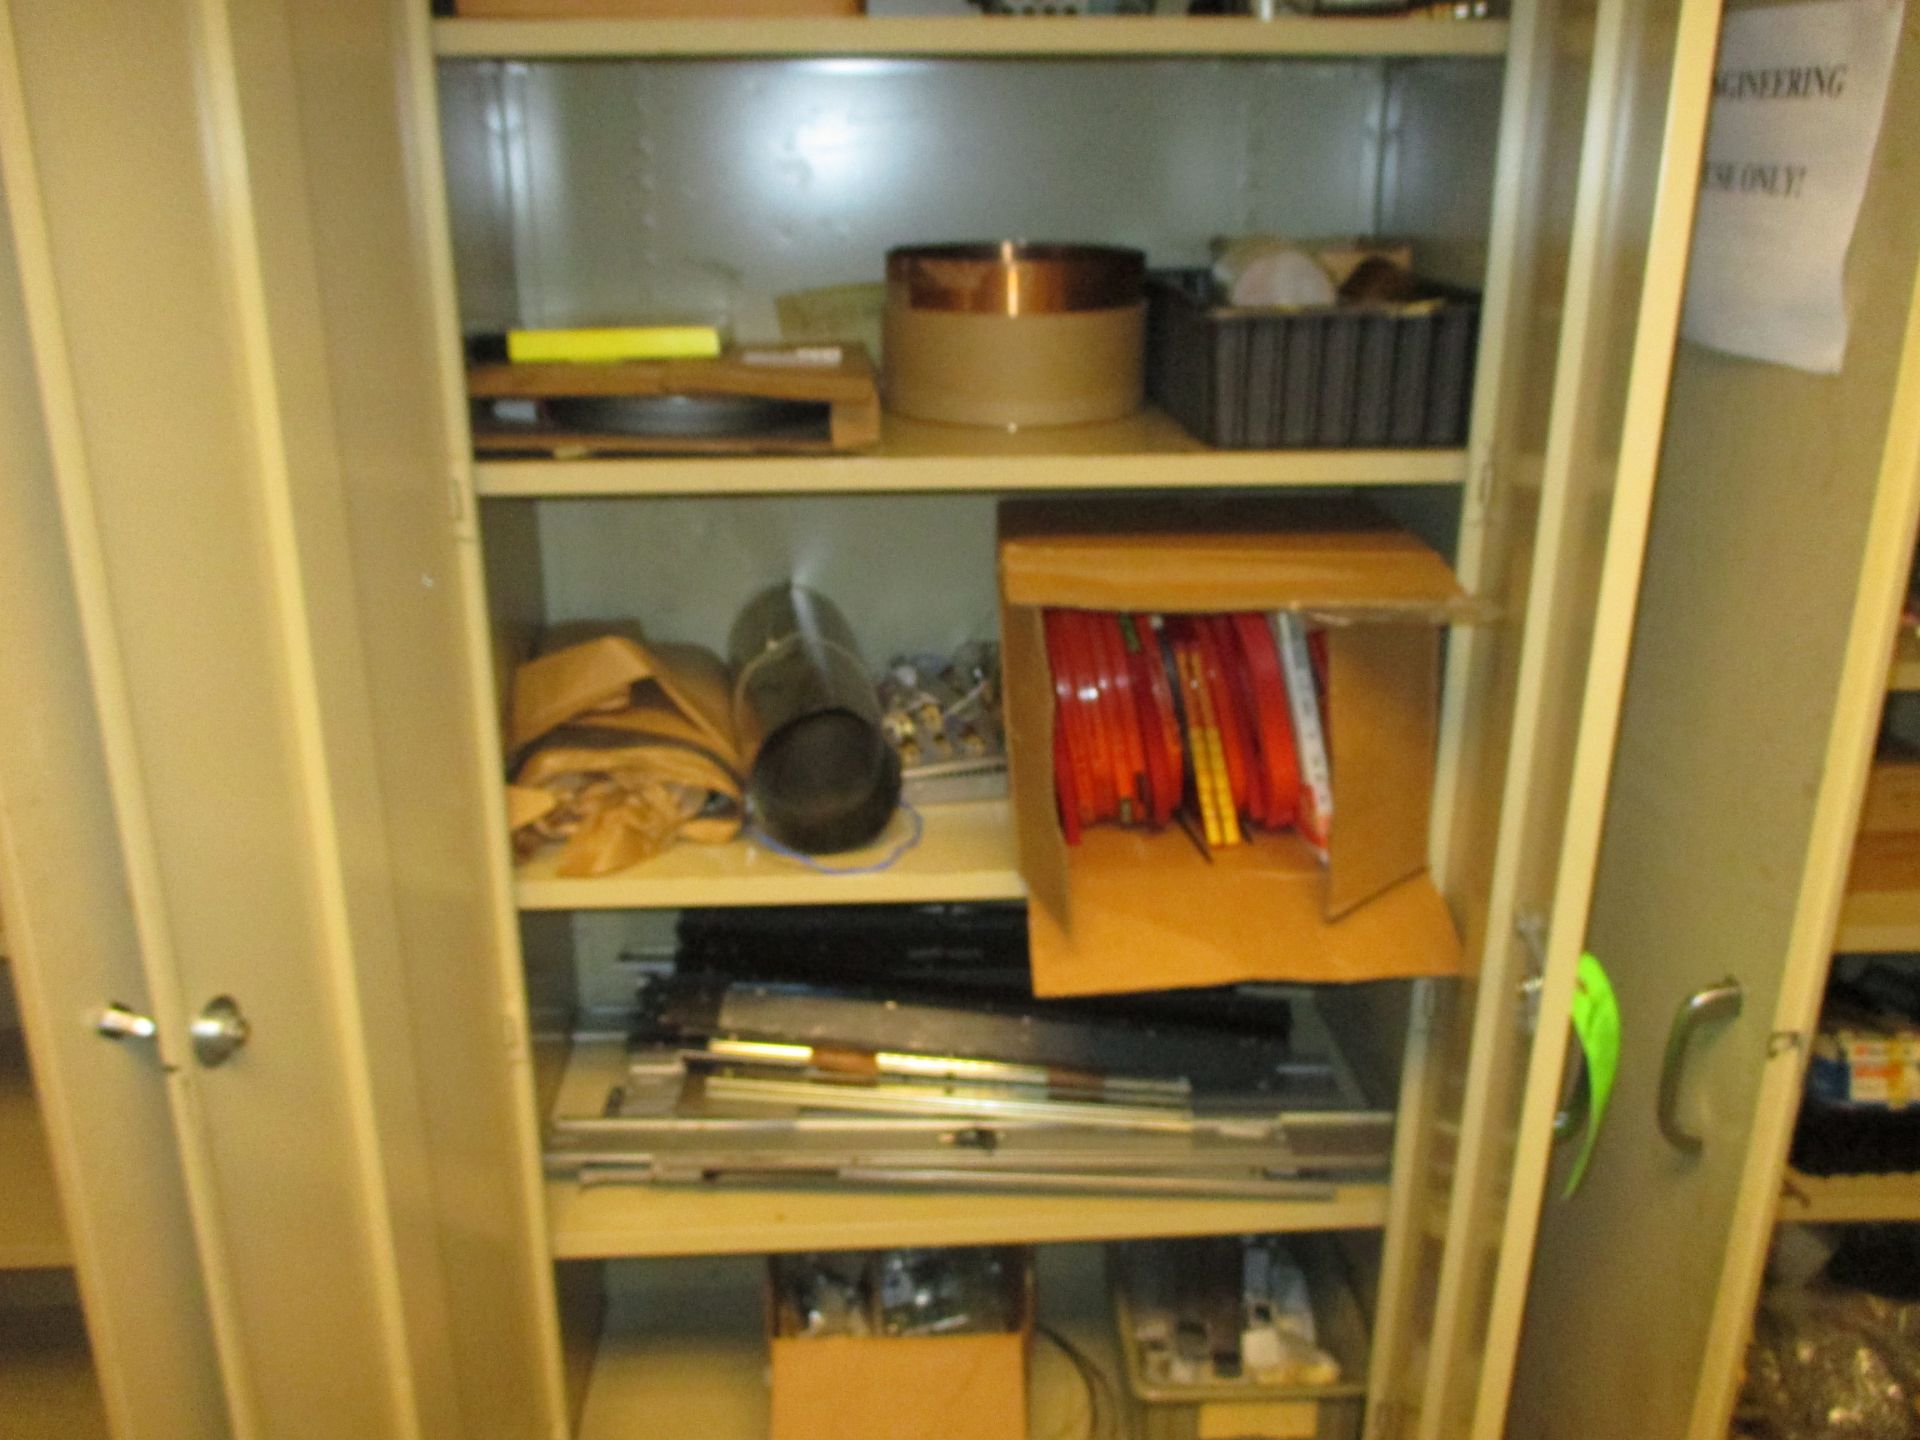 CONTENTS OF CABINET INCLUDING BANDSAW COILS & OTHER MISC ITEMS (Multiple locations. Please see full